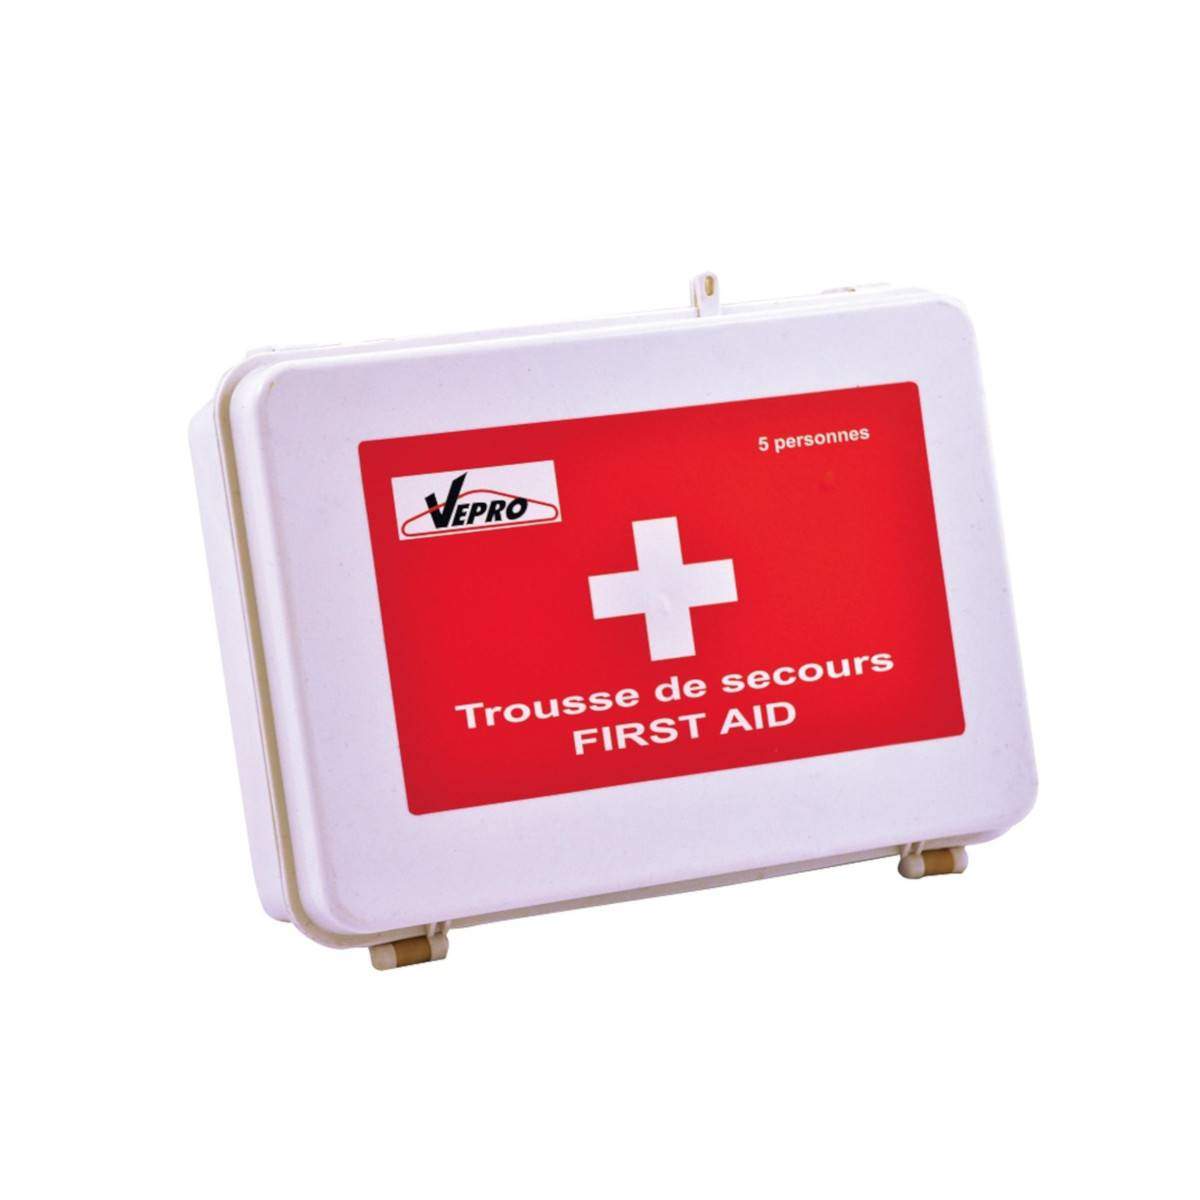 First aid kit for 5 people